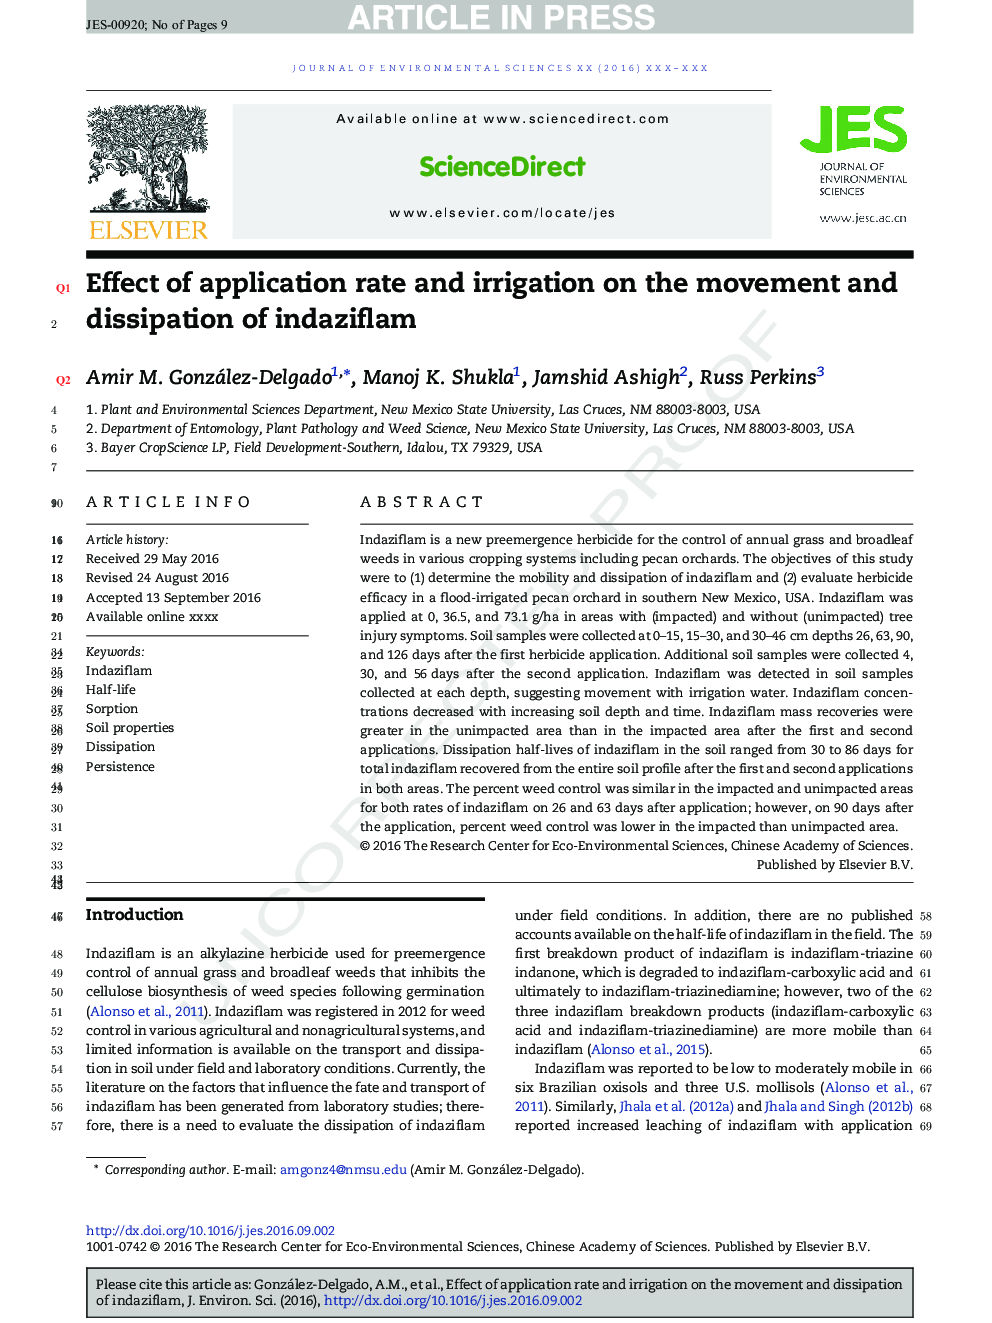 Effect of application rate and irrigation on the movement and dissipation of indaziflam